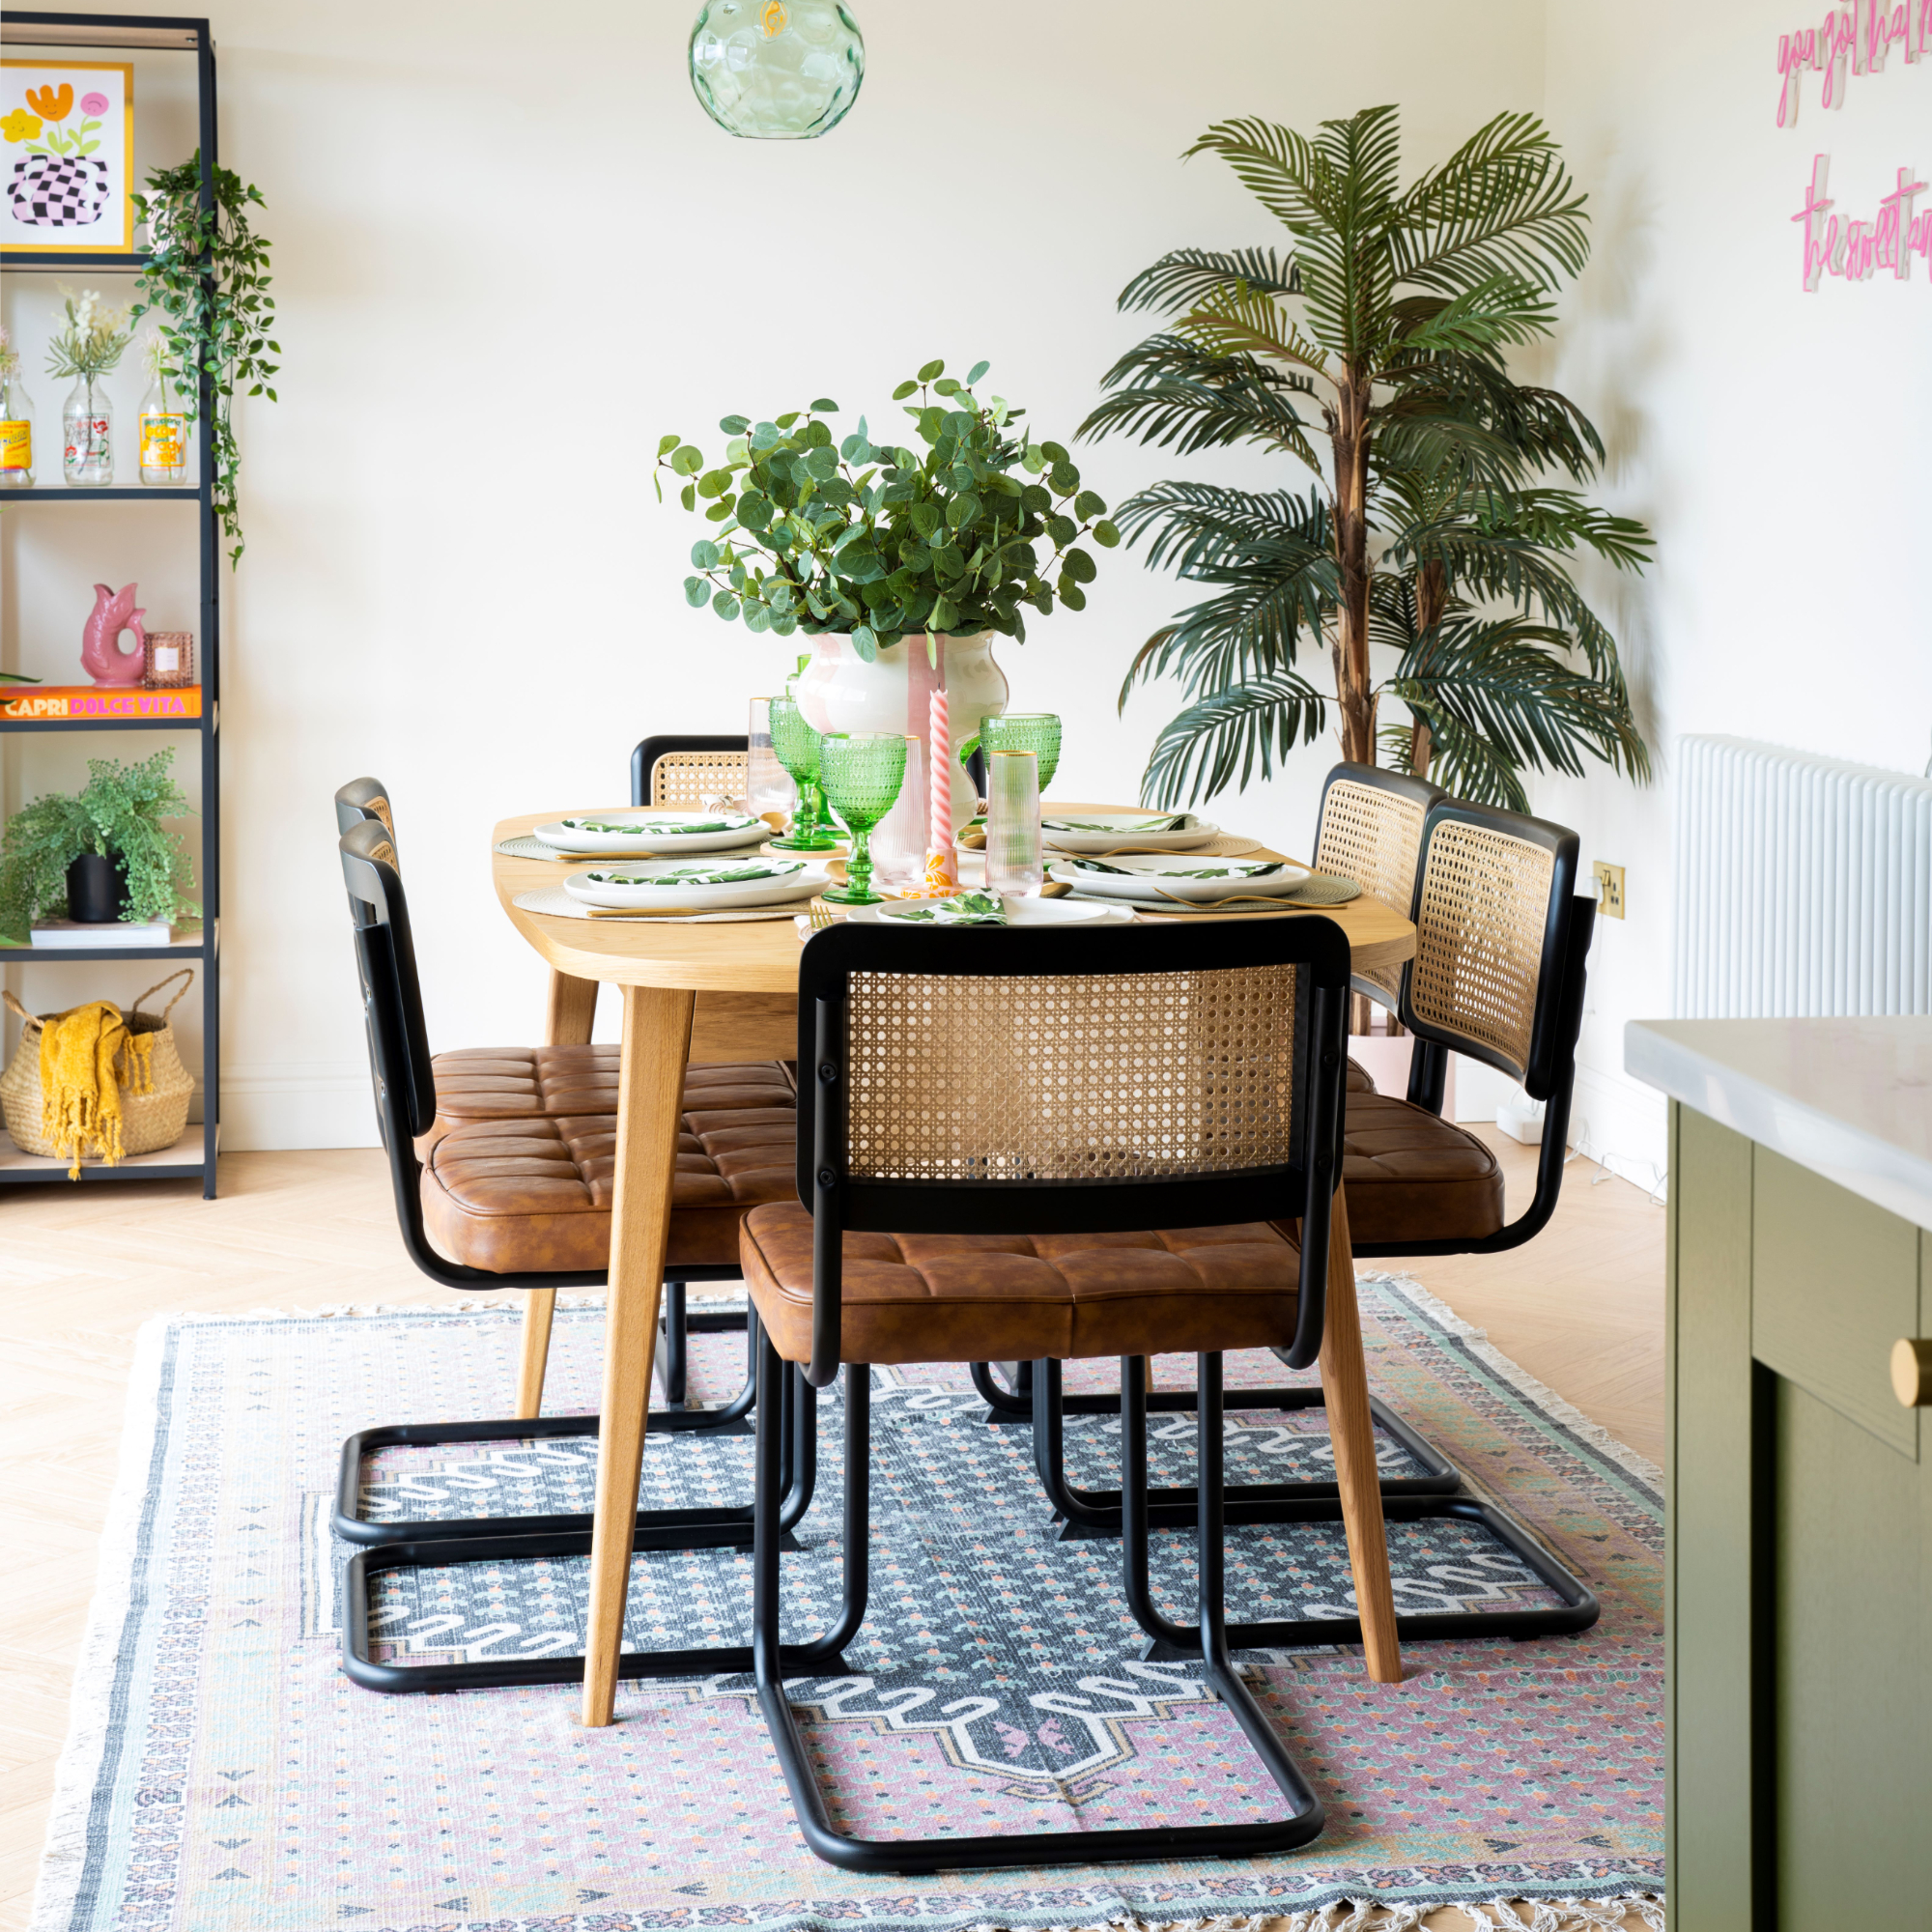 Dining room with rattan chairs, wooden dining table, and rug underneath